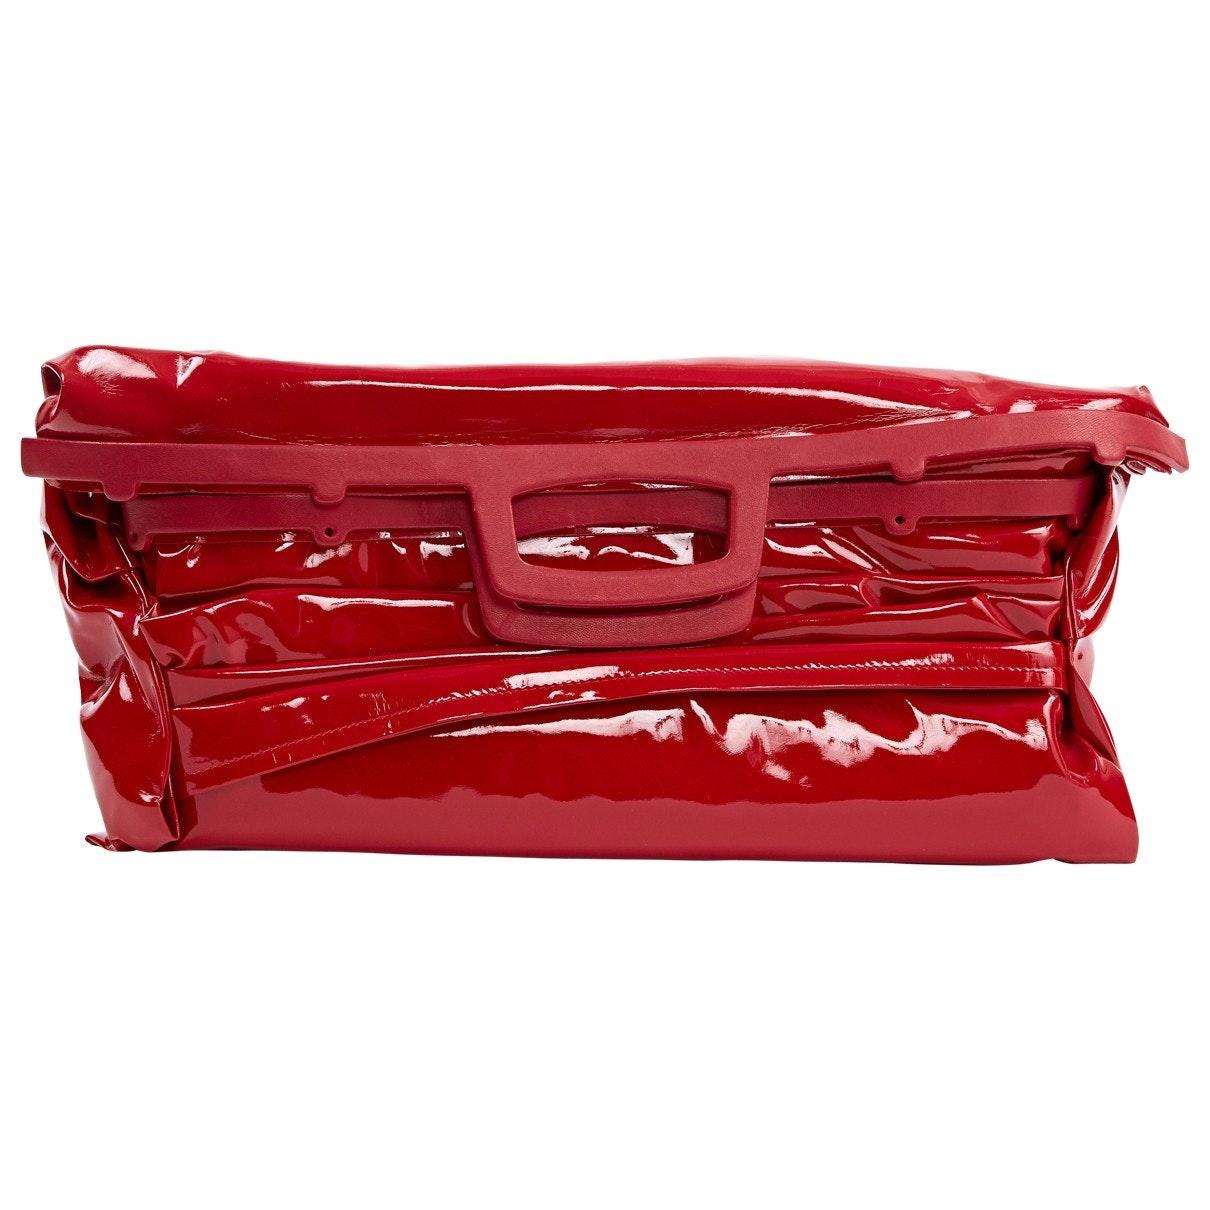 Maison Margiela Red Patent Leather Clutch Bag - Lyst